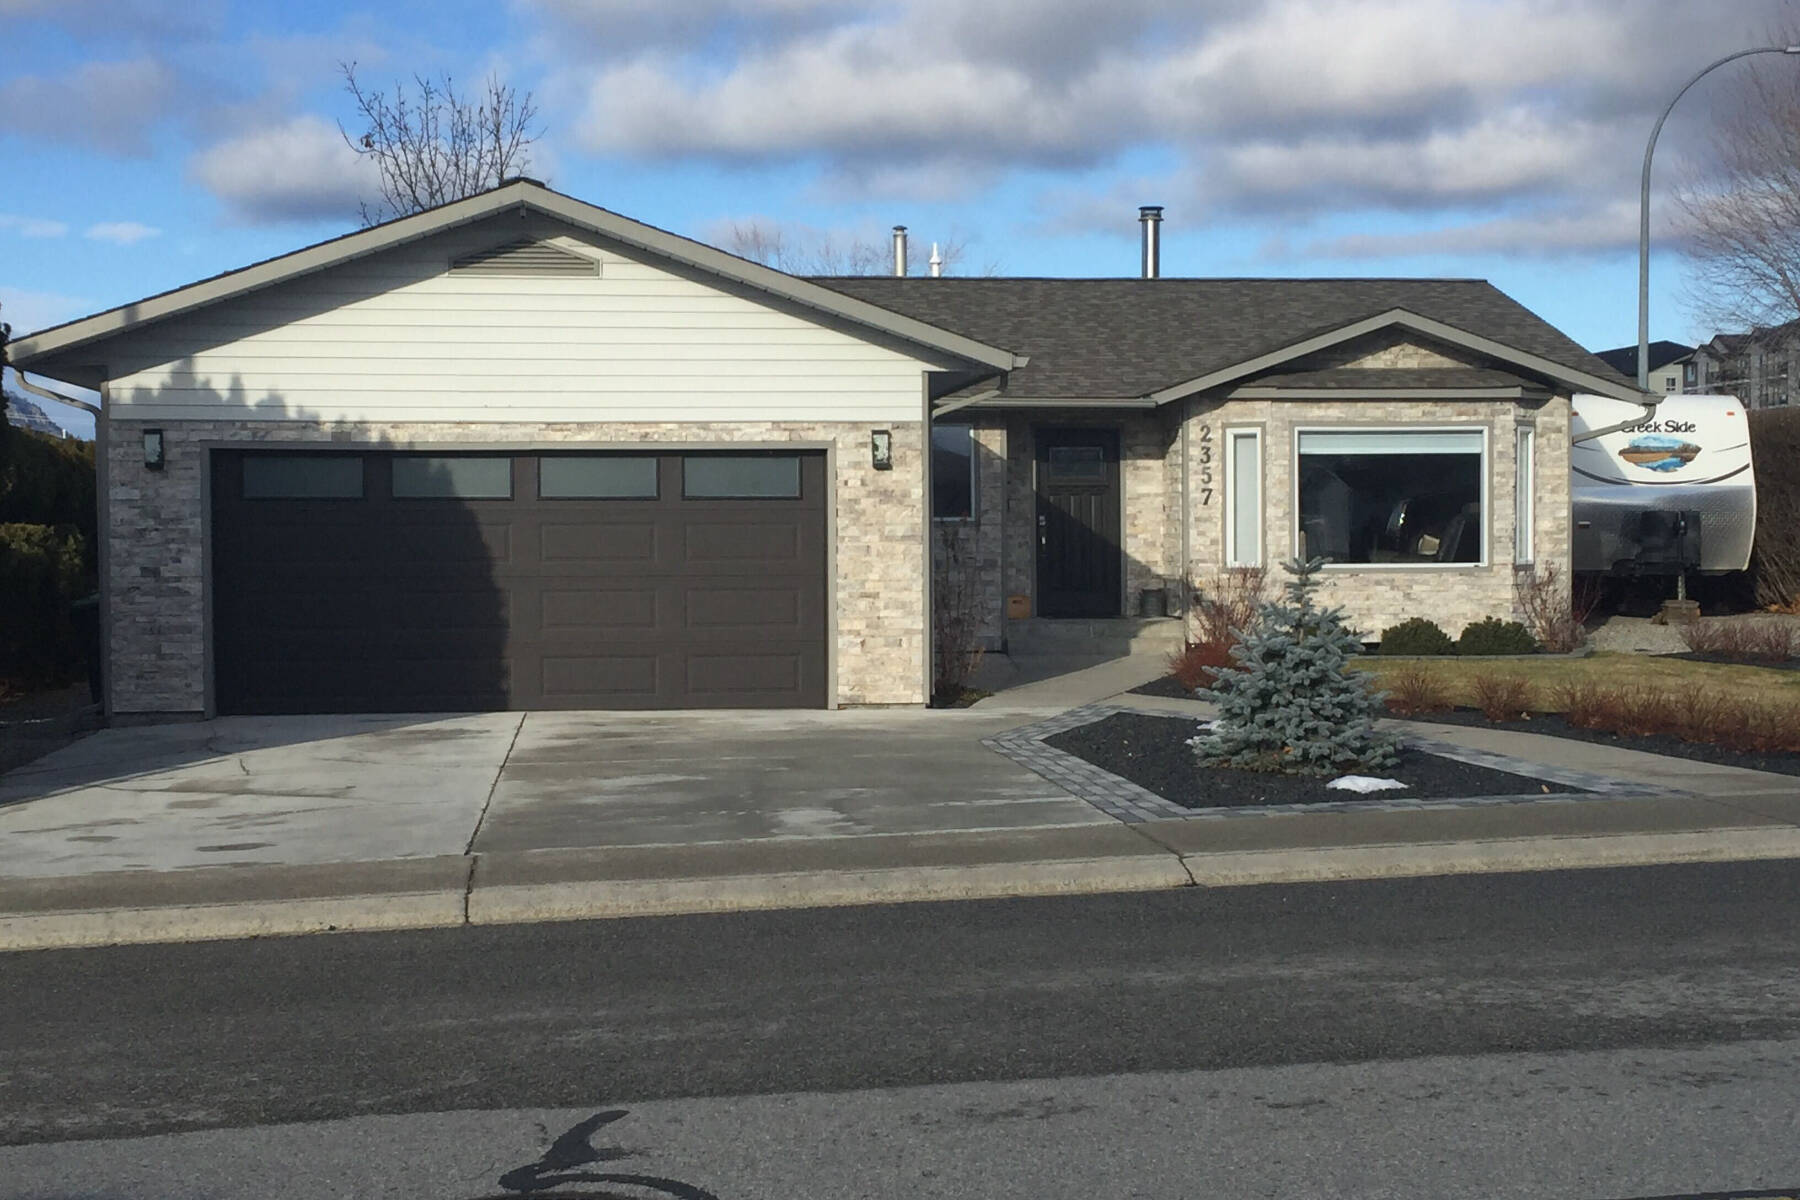 This home at 2357 Cornwall Drive was sold by the city in 2017 for $150,000 at auction. It was assessed at $420,000. The BC Ombudsperson filed a report saying the city failed to help a vulnerable person and sold her home over not paying $10,000 property tax. Since then, changes have been made in provincial legislation regarding tax sales. (File)